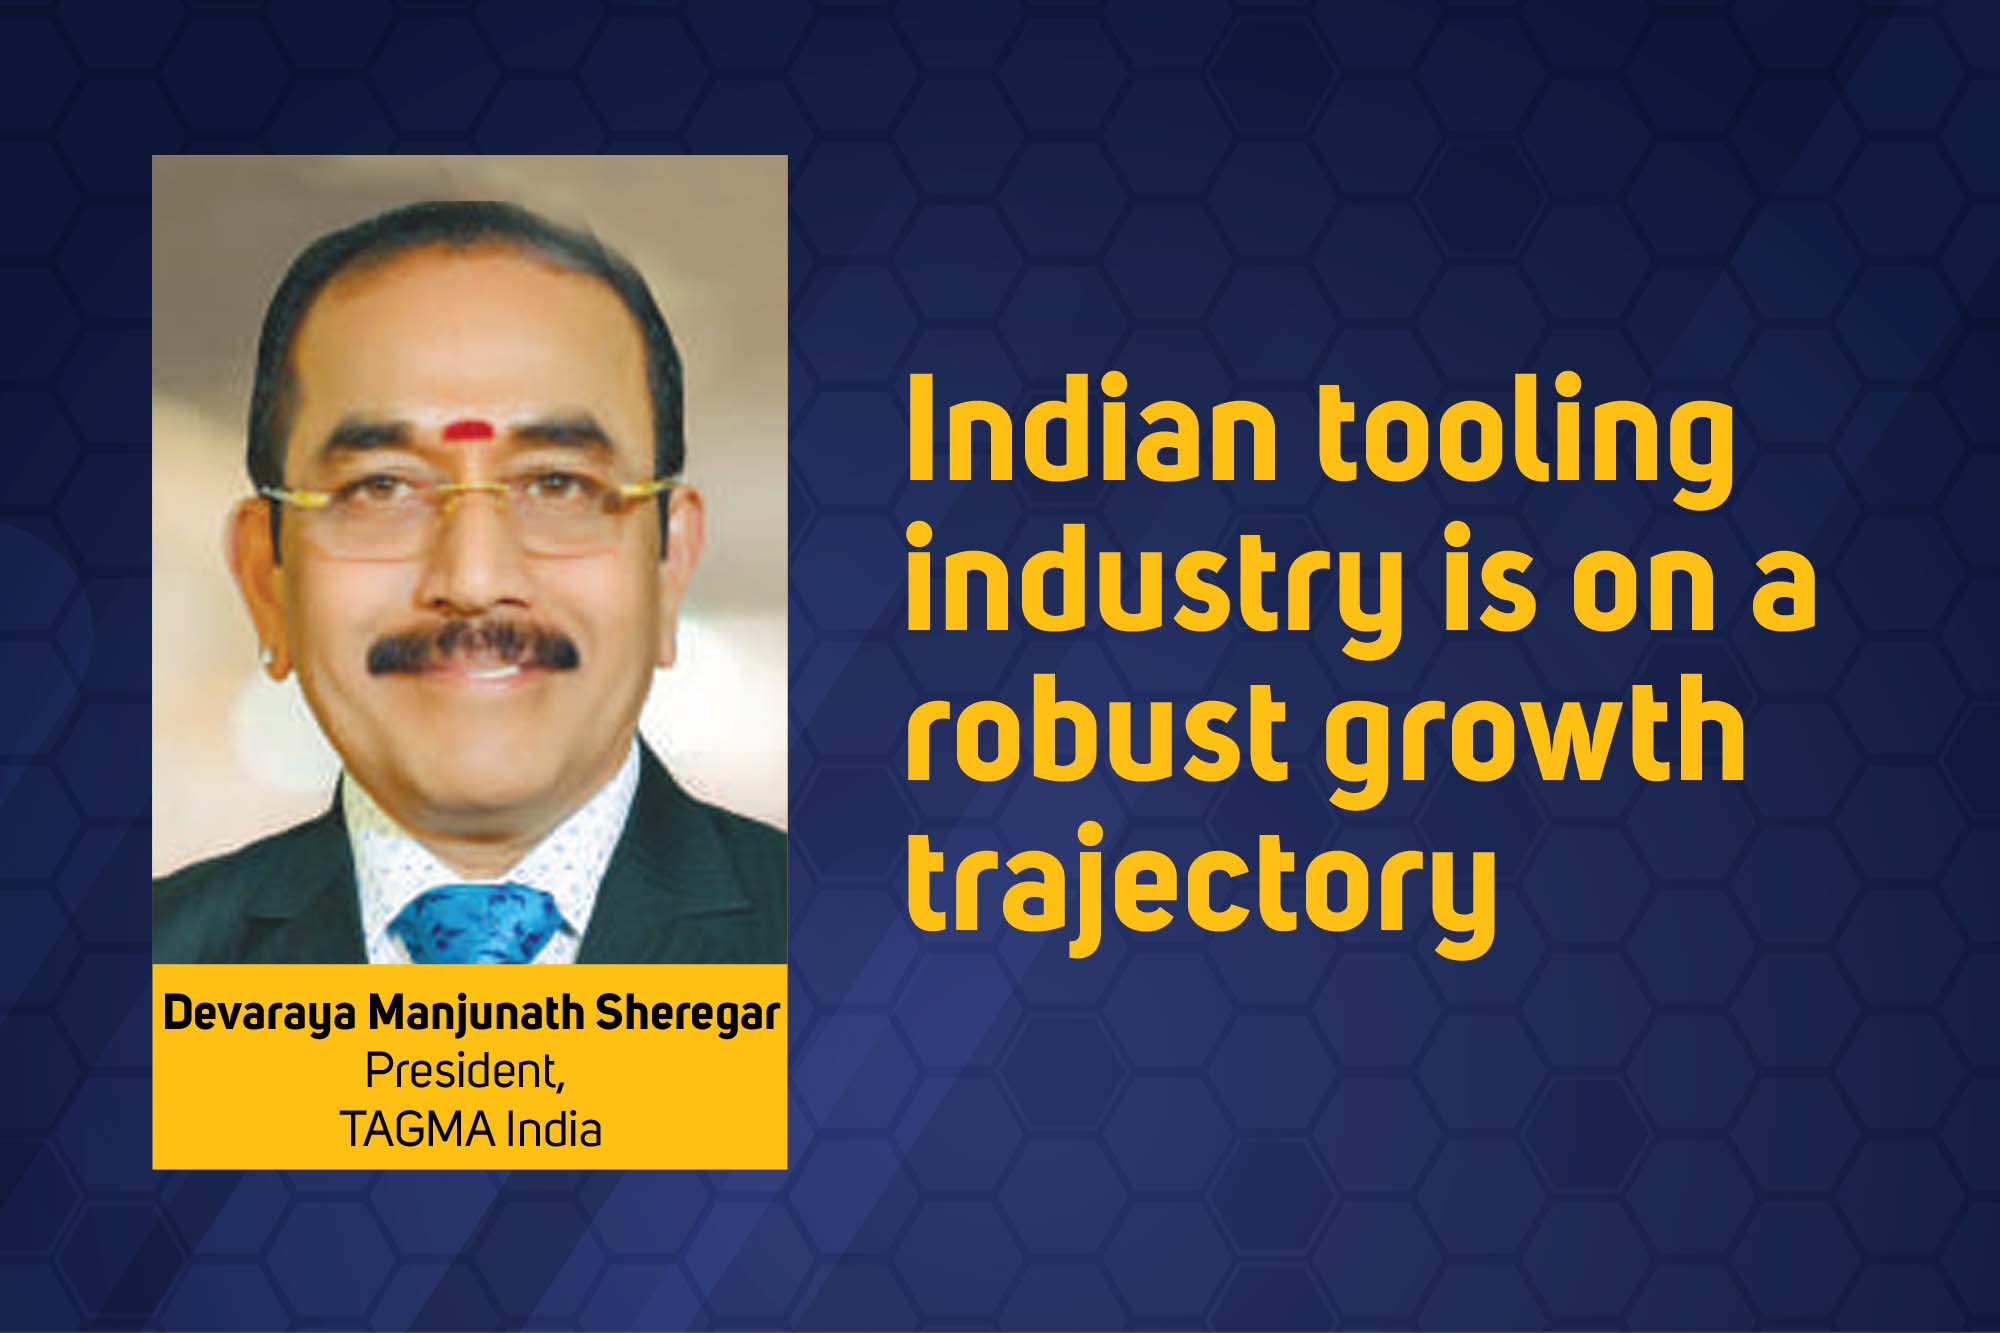 Indian tooling industry is on a robust growth trajectory